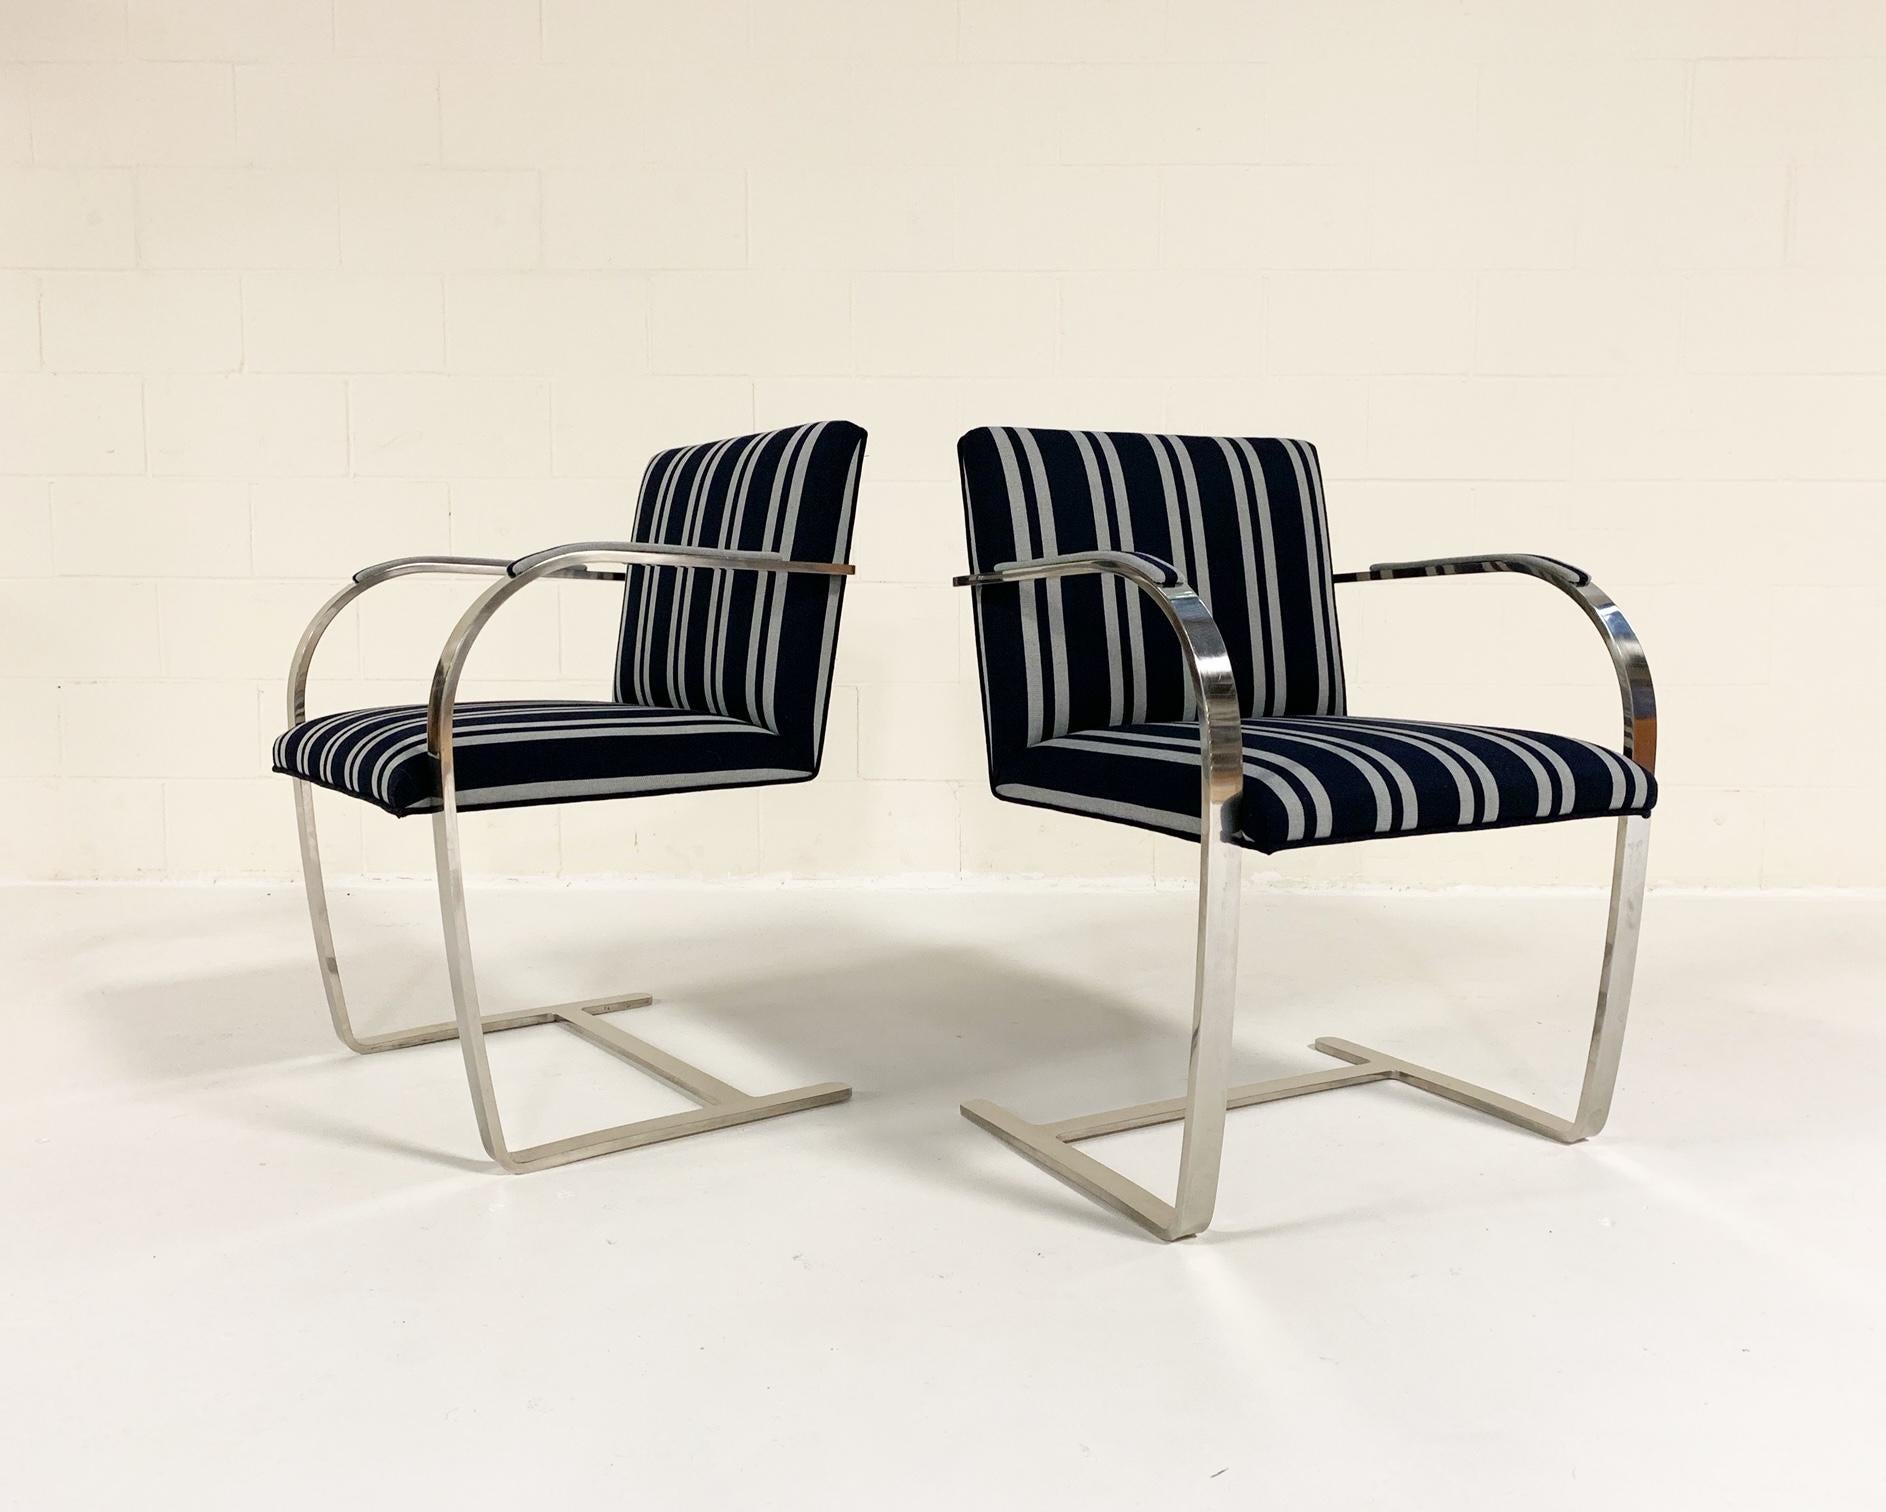 This iconic chair pair is part of the Kule x Forsyth collab. Introducing a collection of timeless design icons restored by Forsyth with fabric designed by Kule. The collection includes an Eero Saarinen womb chair, Ludwig Mies van der Rohe Brno